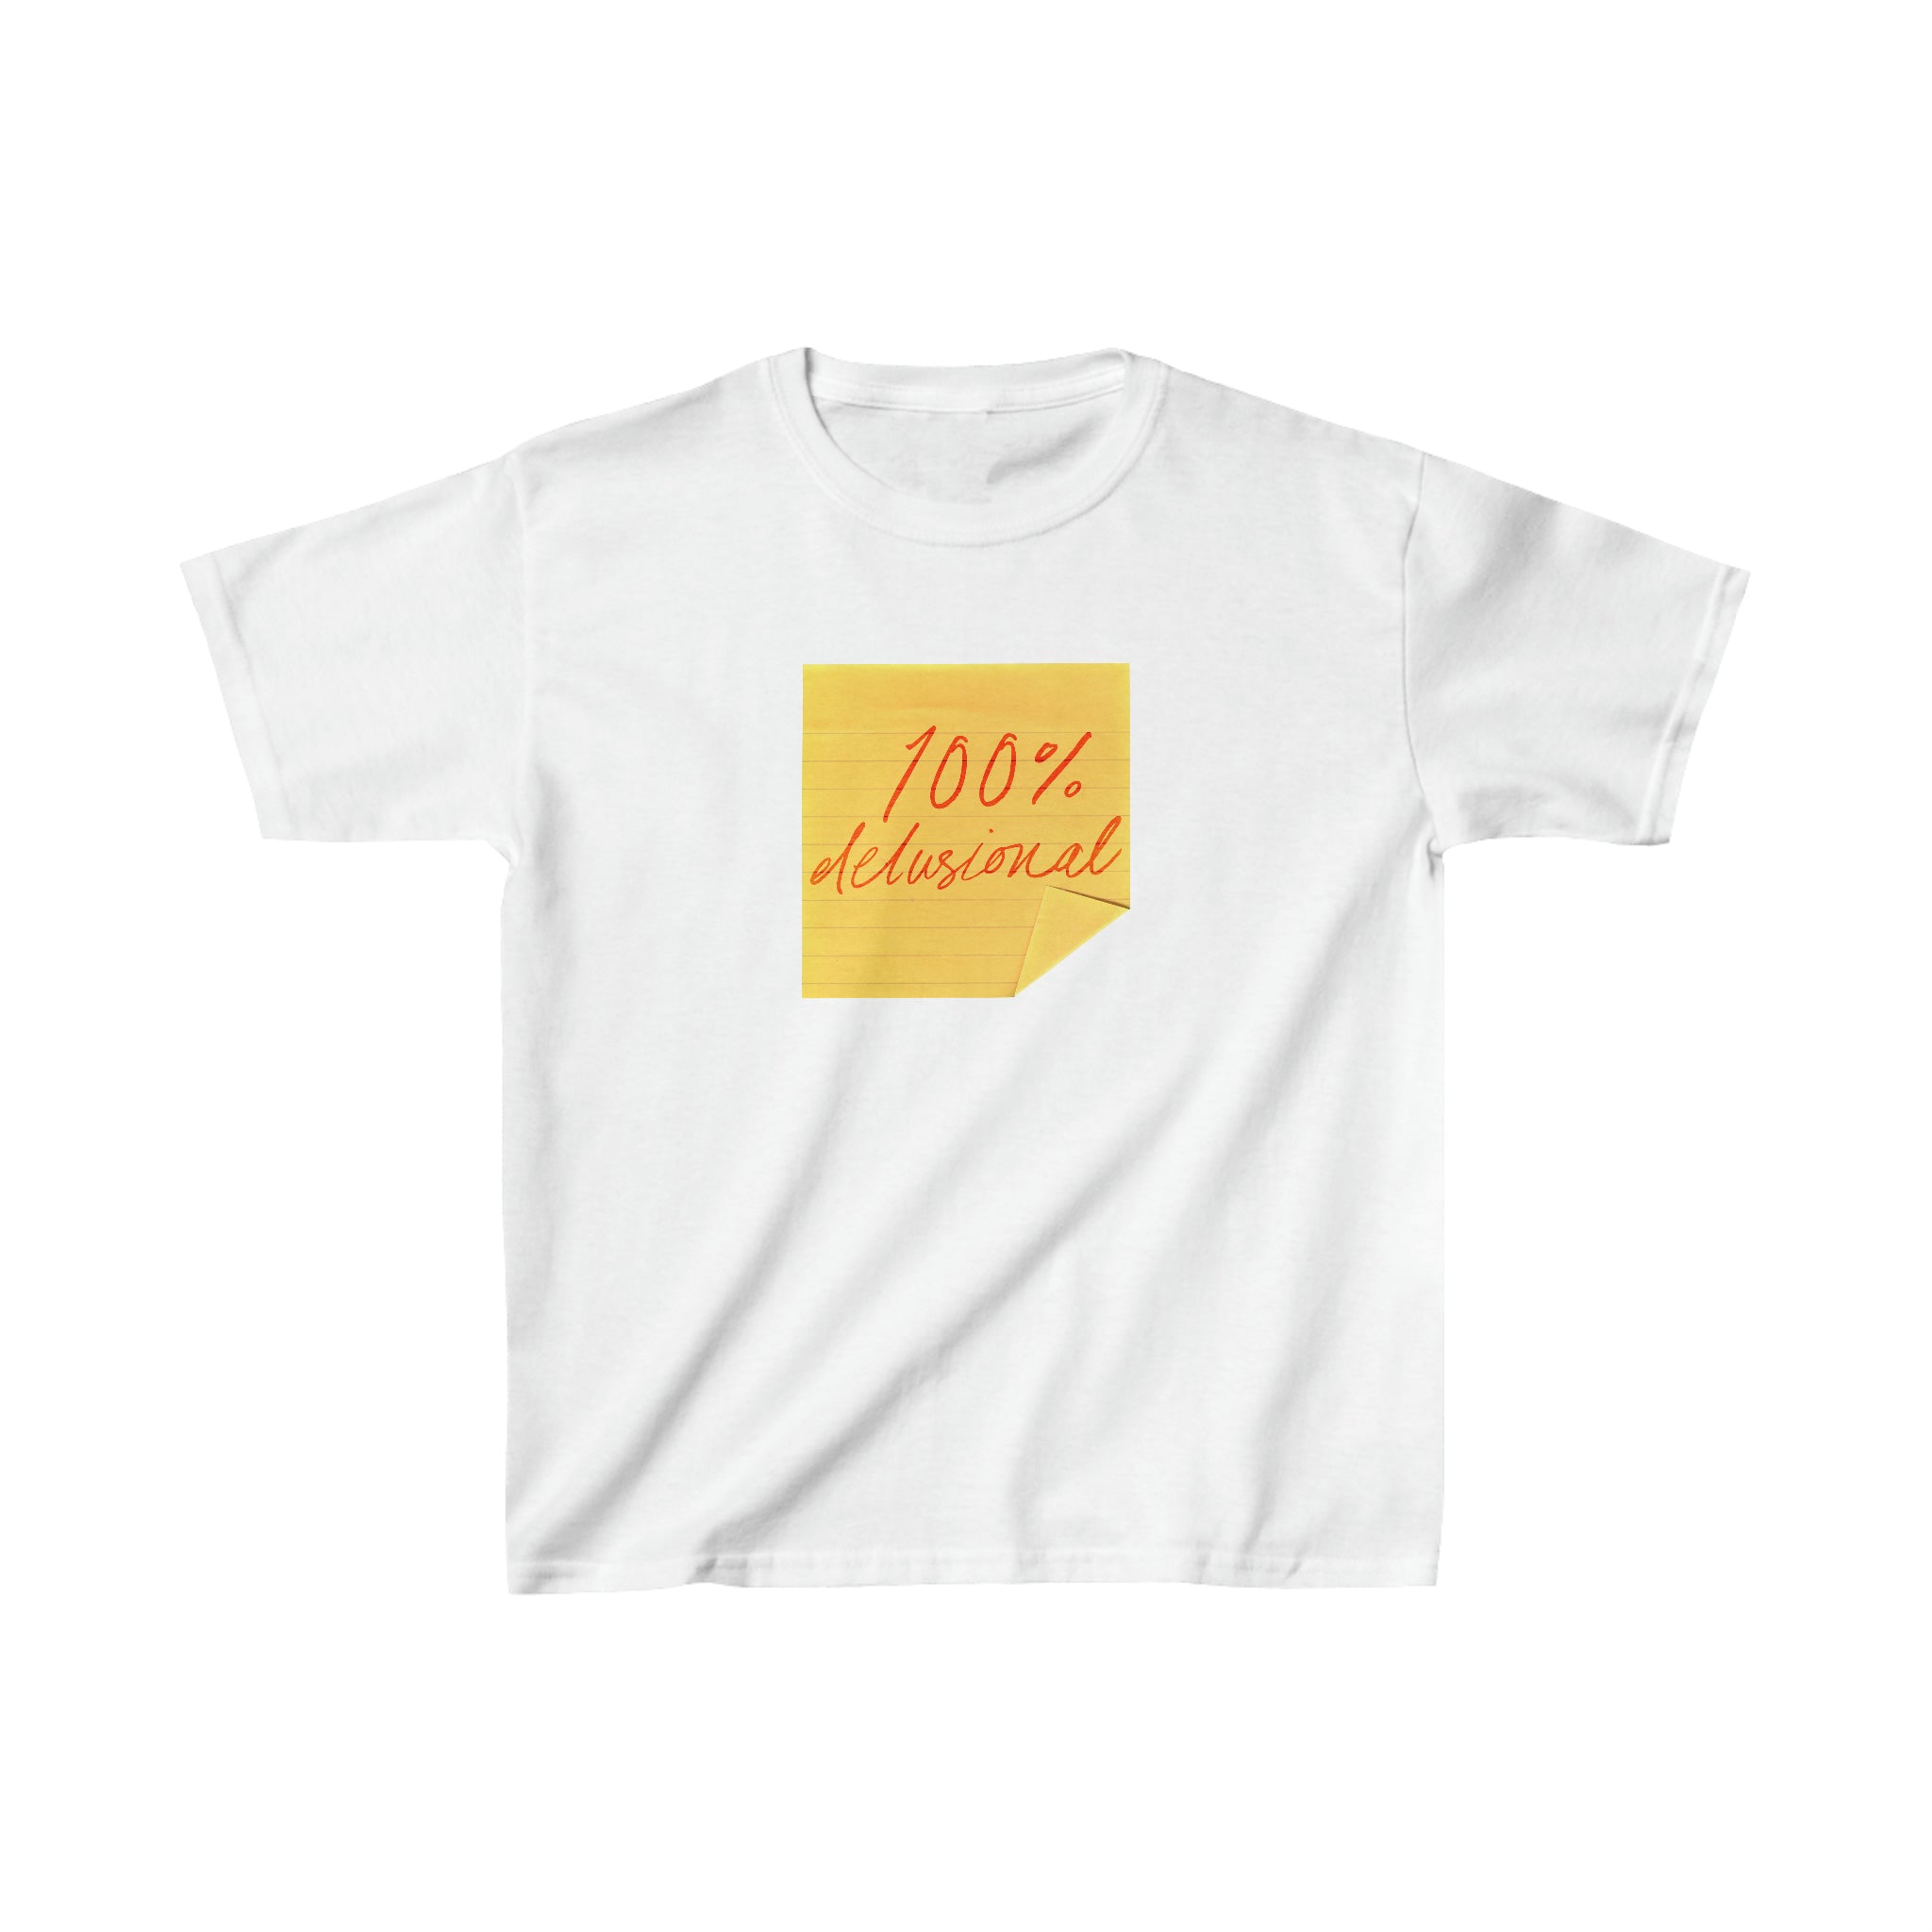 '100% delusional' baby tee - In Print We Trust